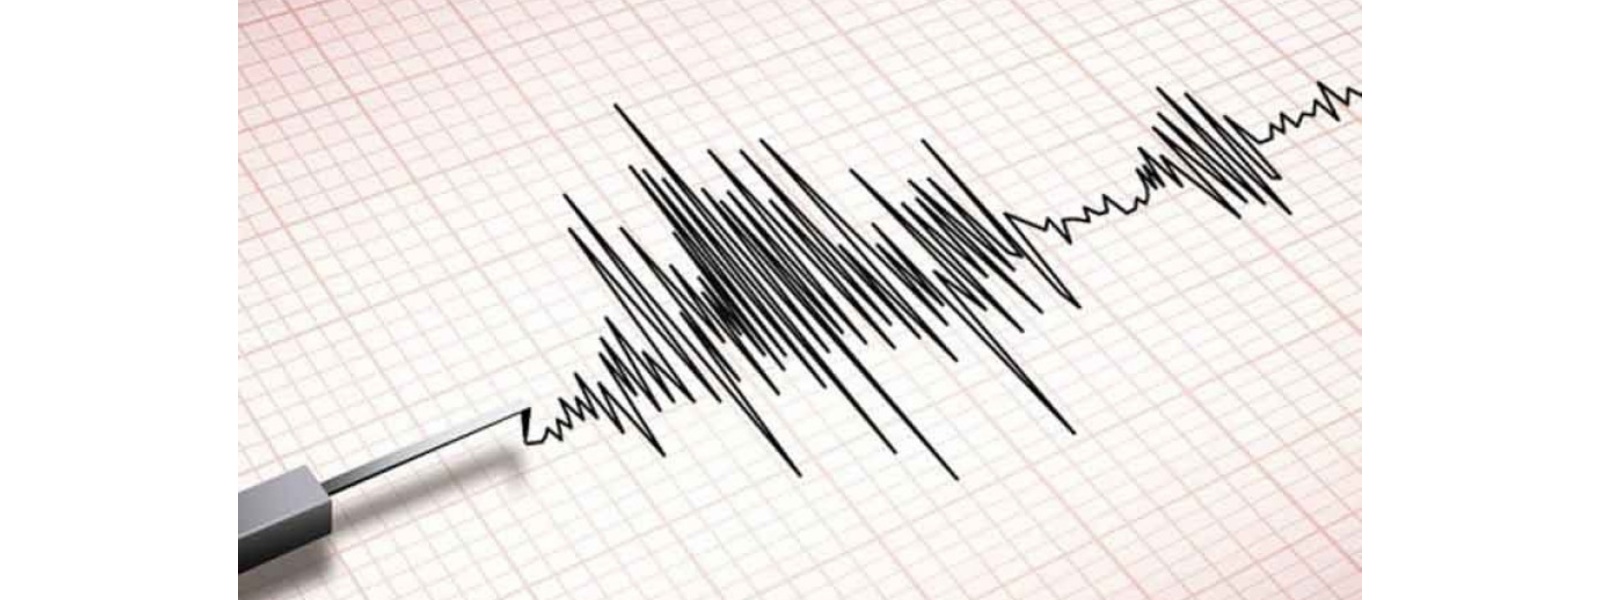 Committee appointed to probe tremors in the central hills